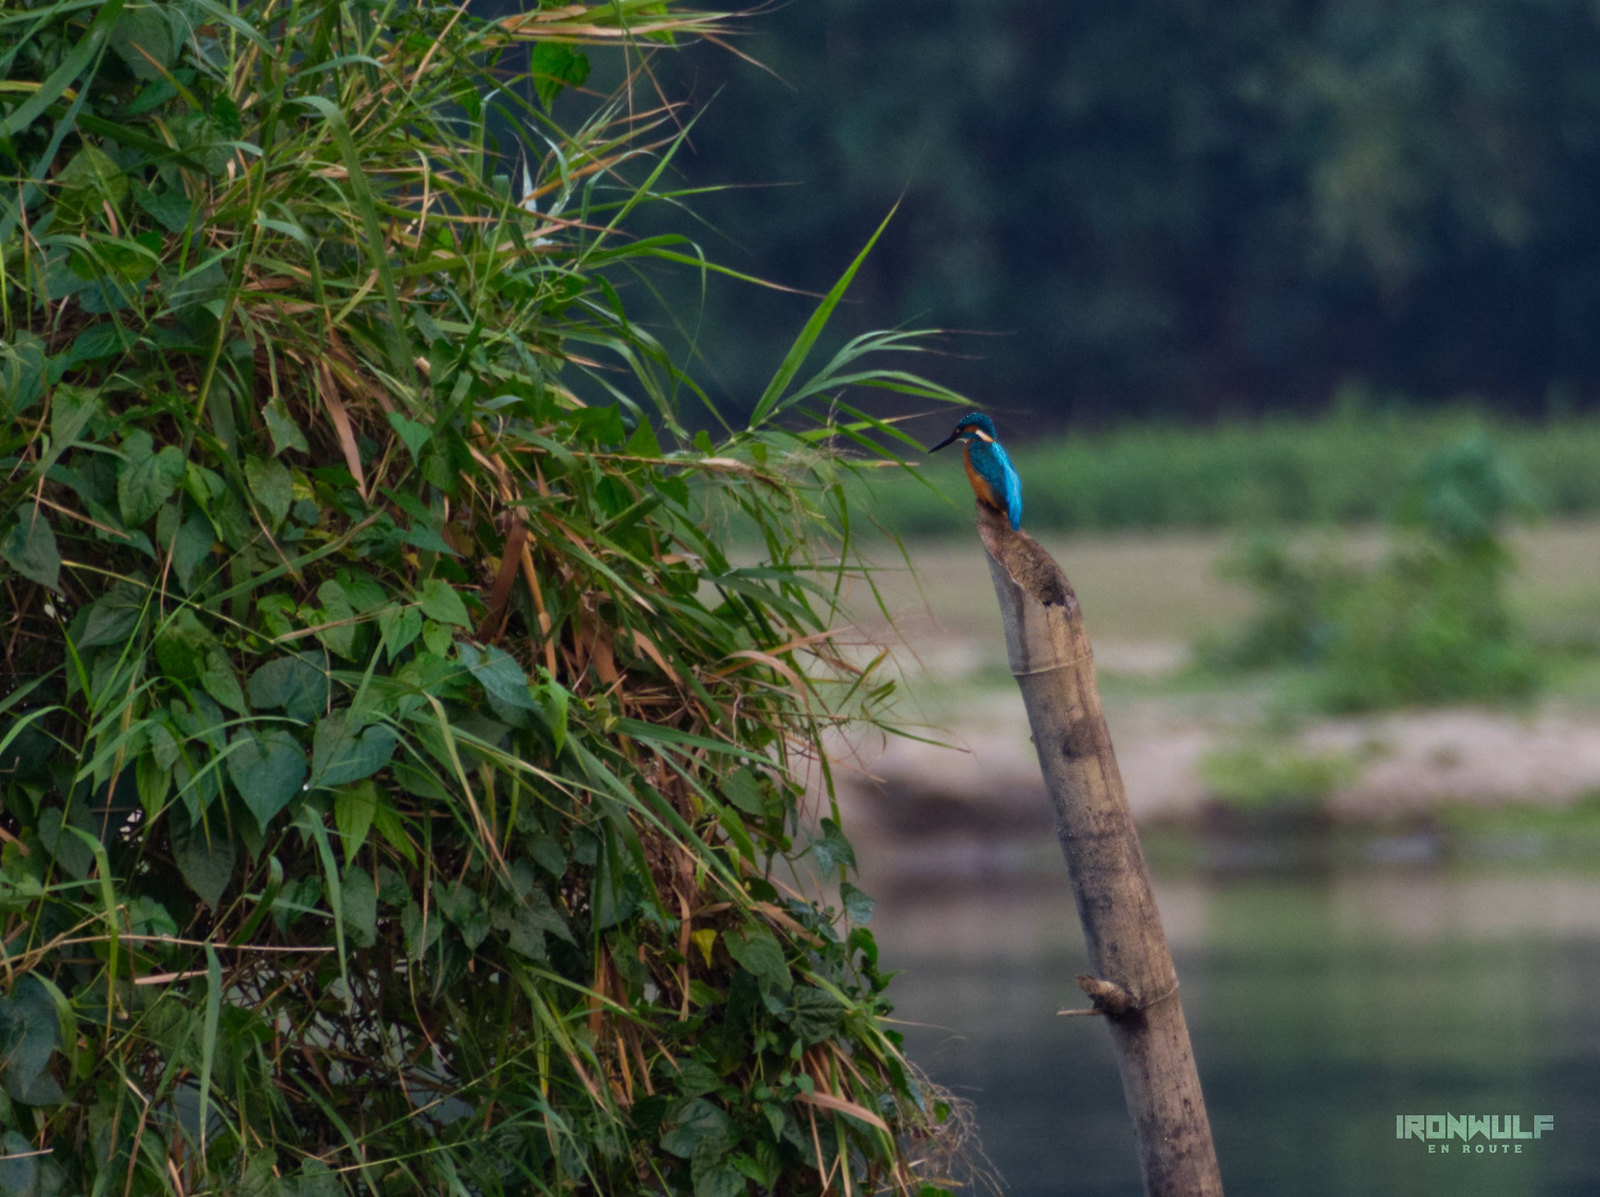 A Common Kingfisher (Alcedo atthis) hunting in Lake Mapanuepe.